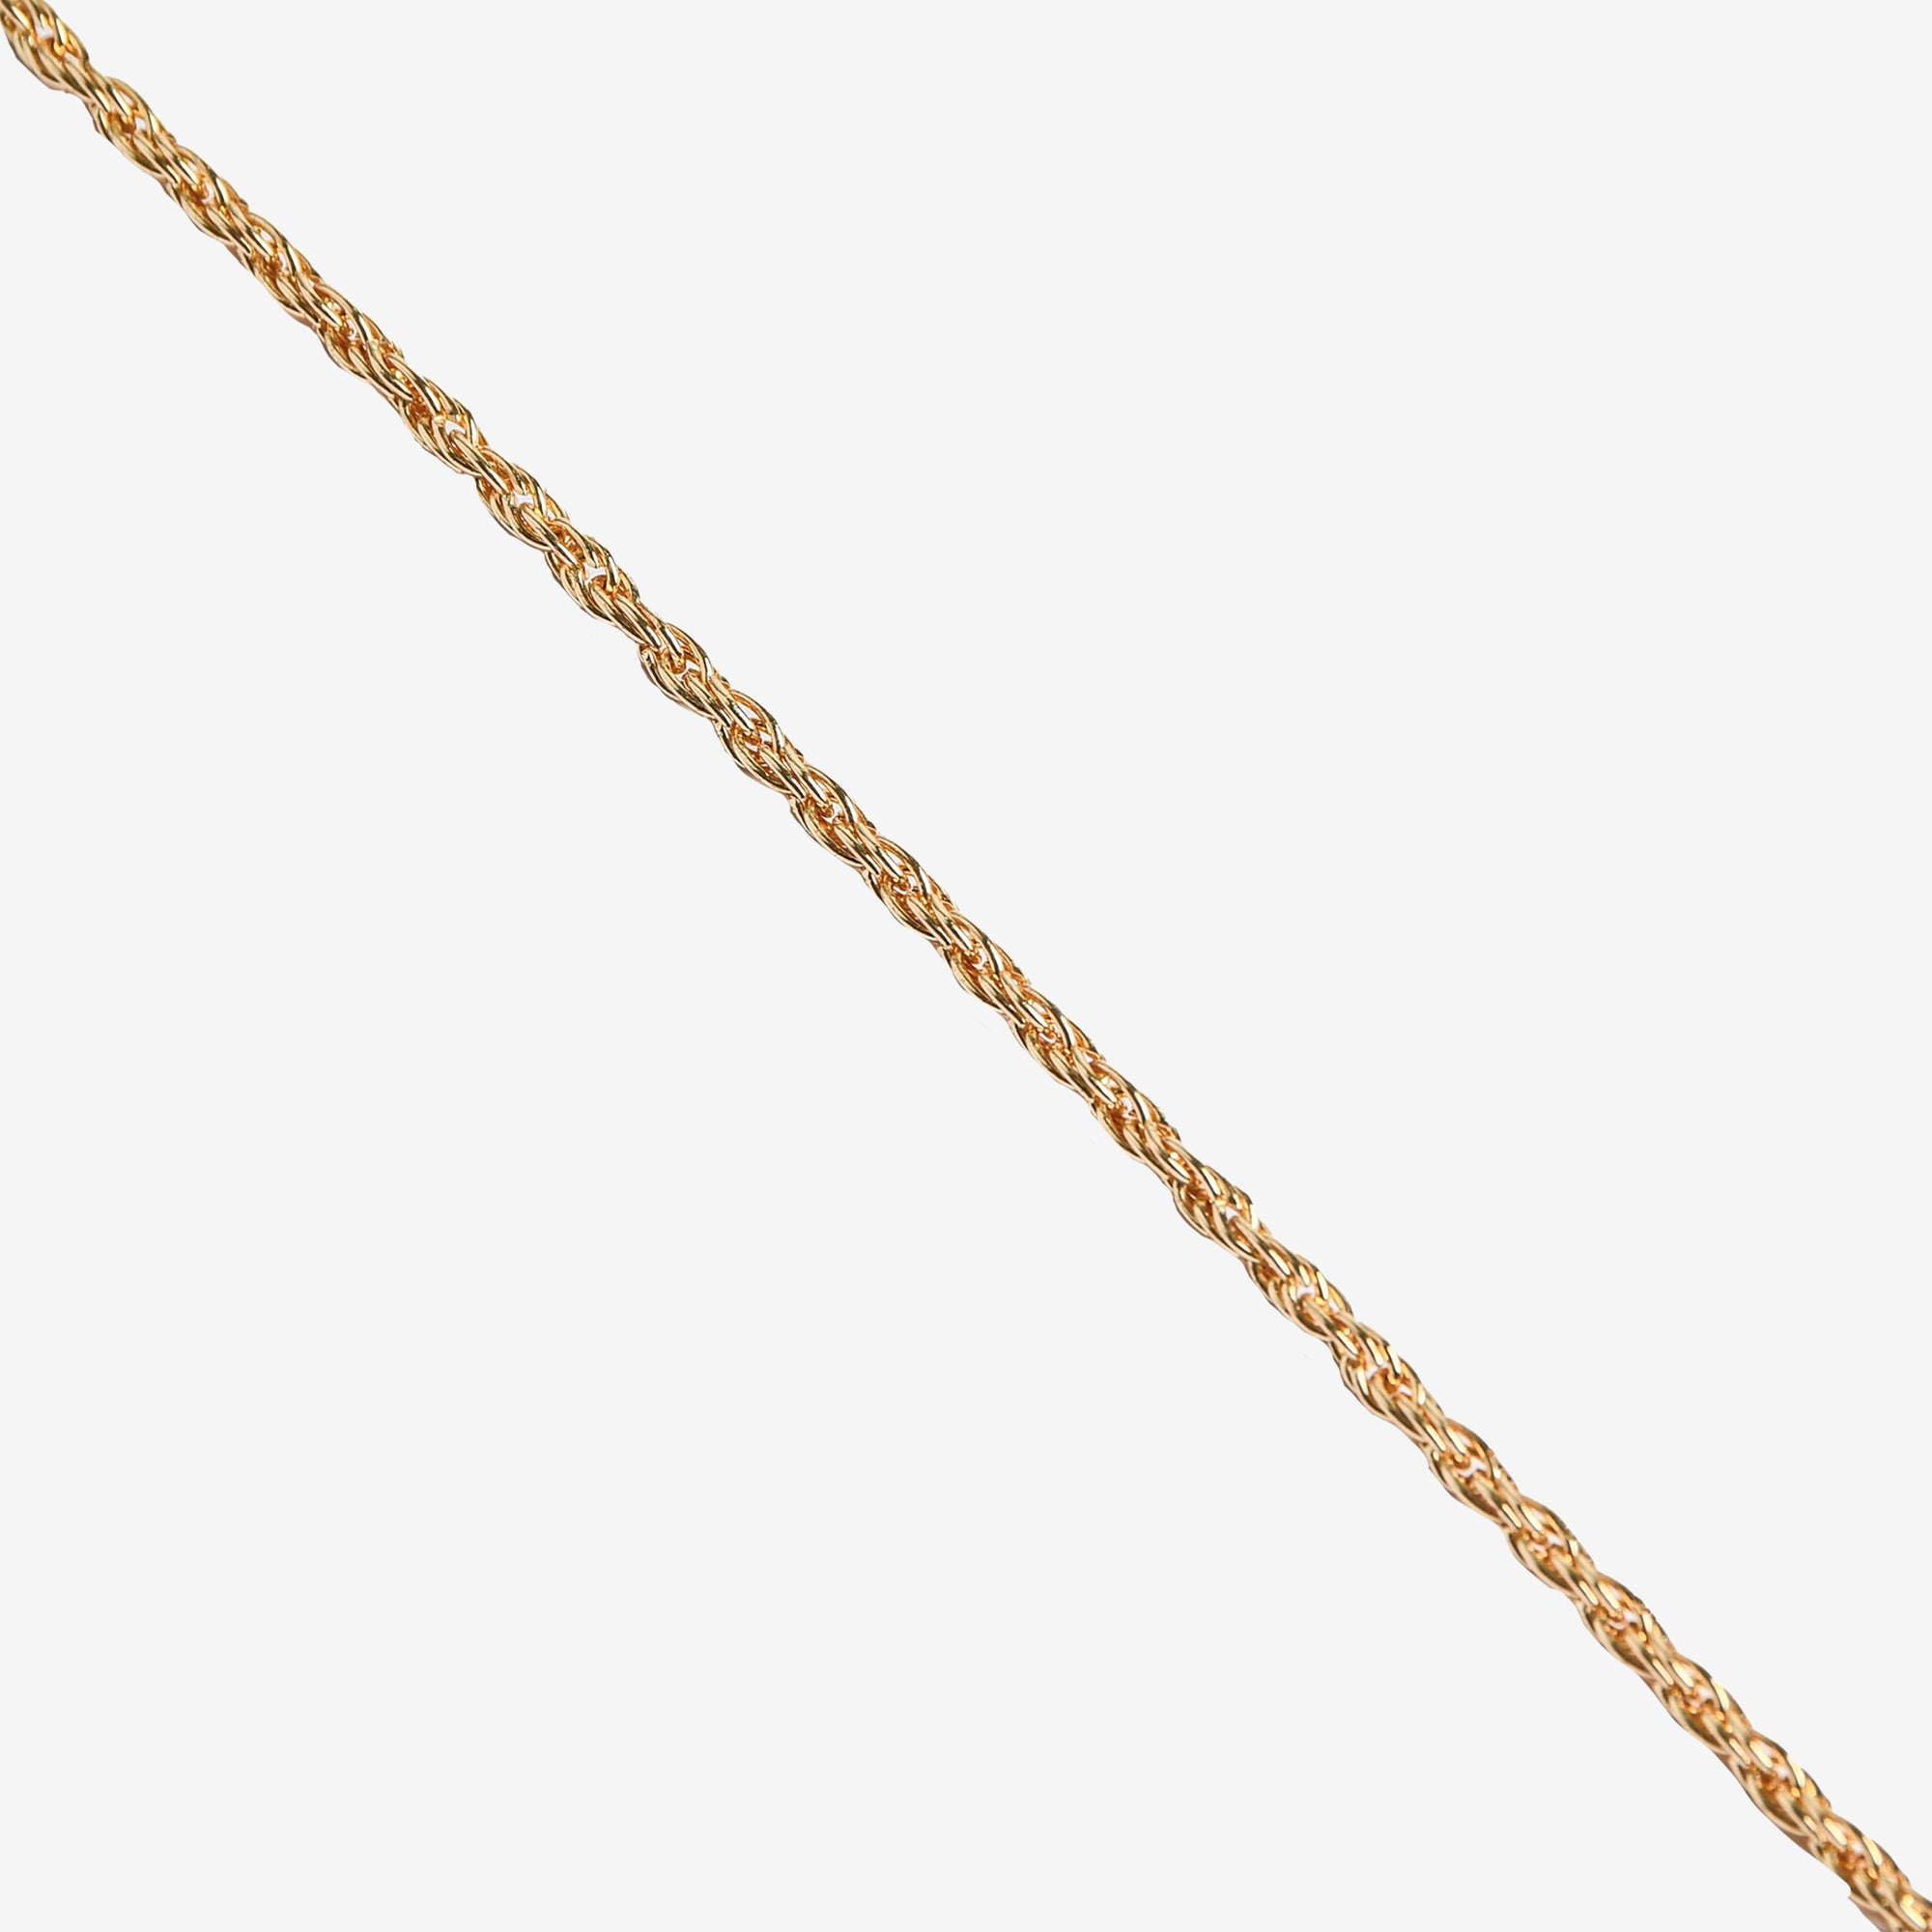 Thick golden ankle chain